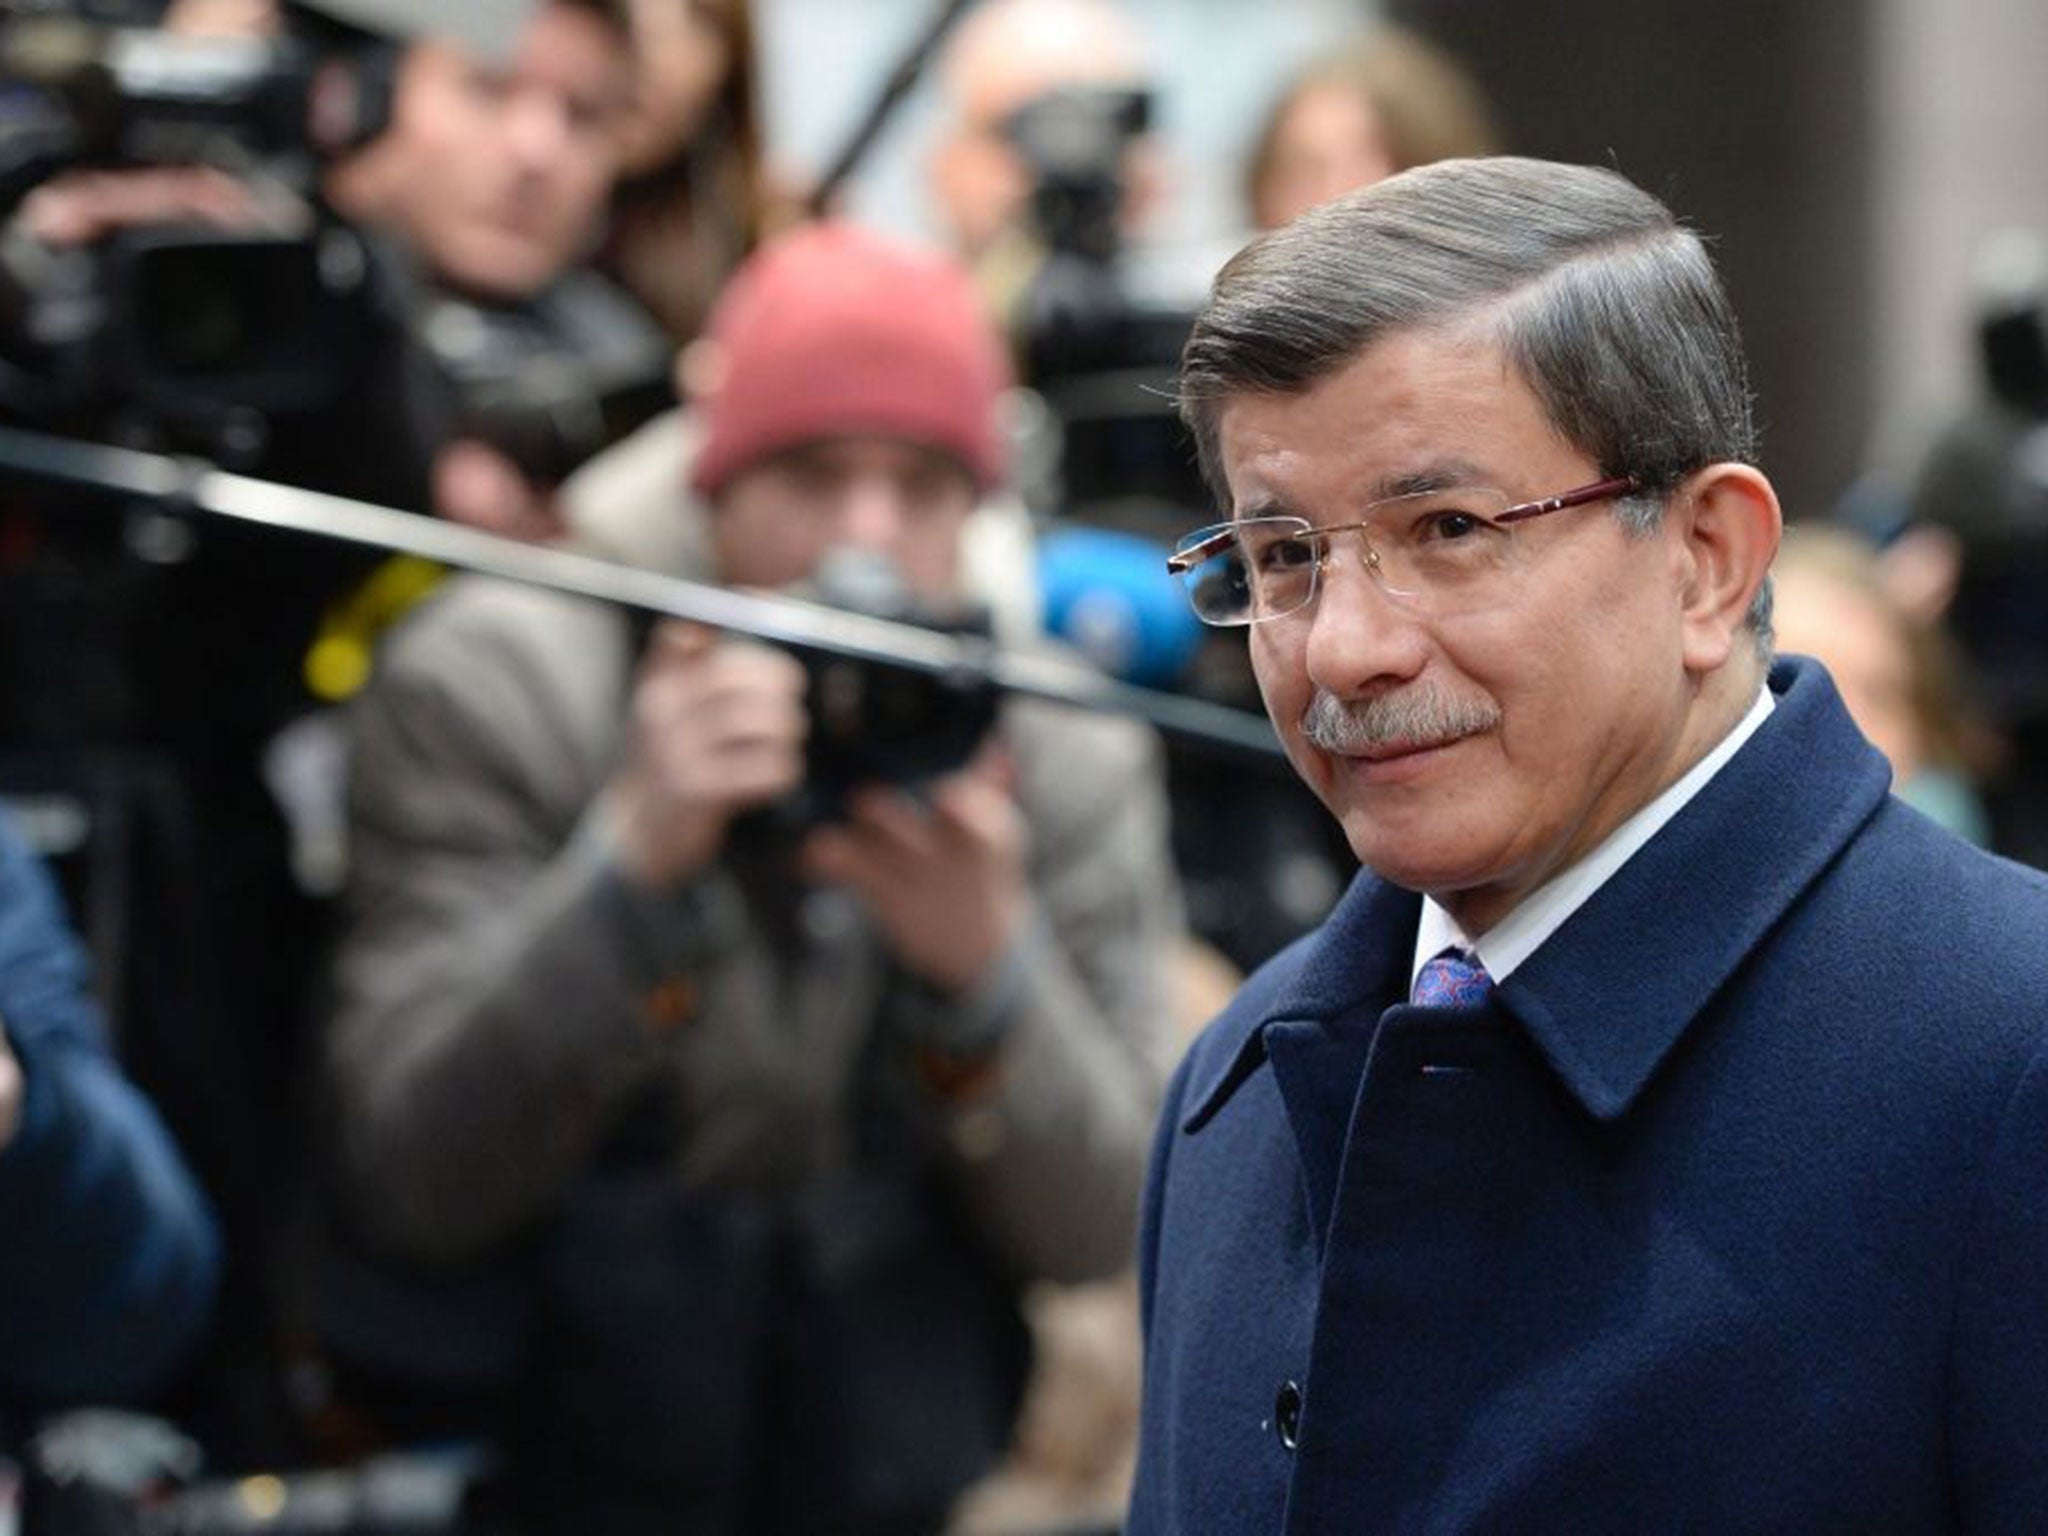 Turkish Prime Minister Ahmet Davutoglu arrives on the second day of the European Union summit to discuss the ongoing refugee crisis, in Brussels on March 18, 2016.